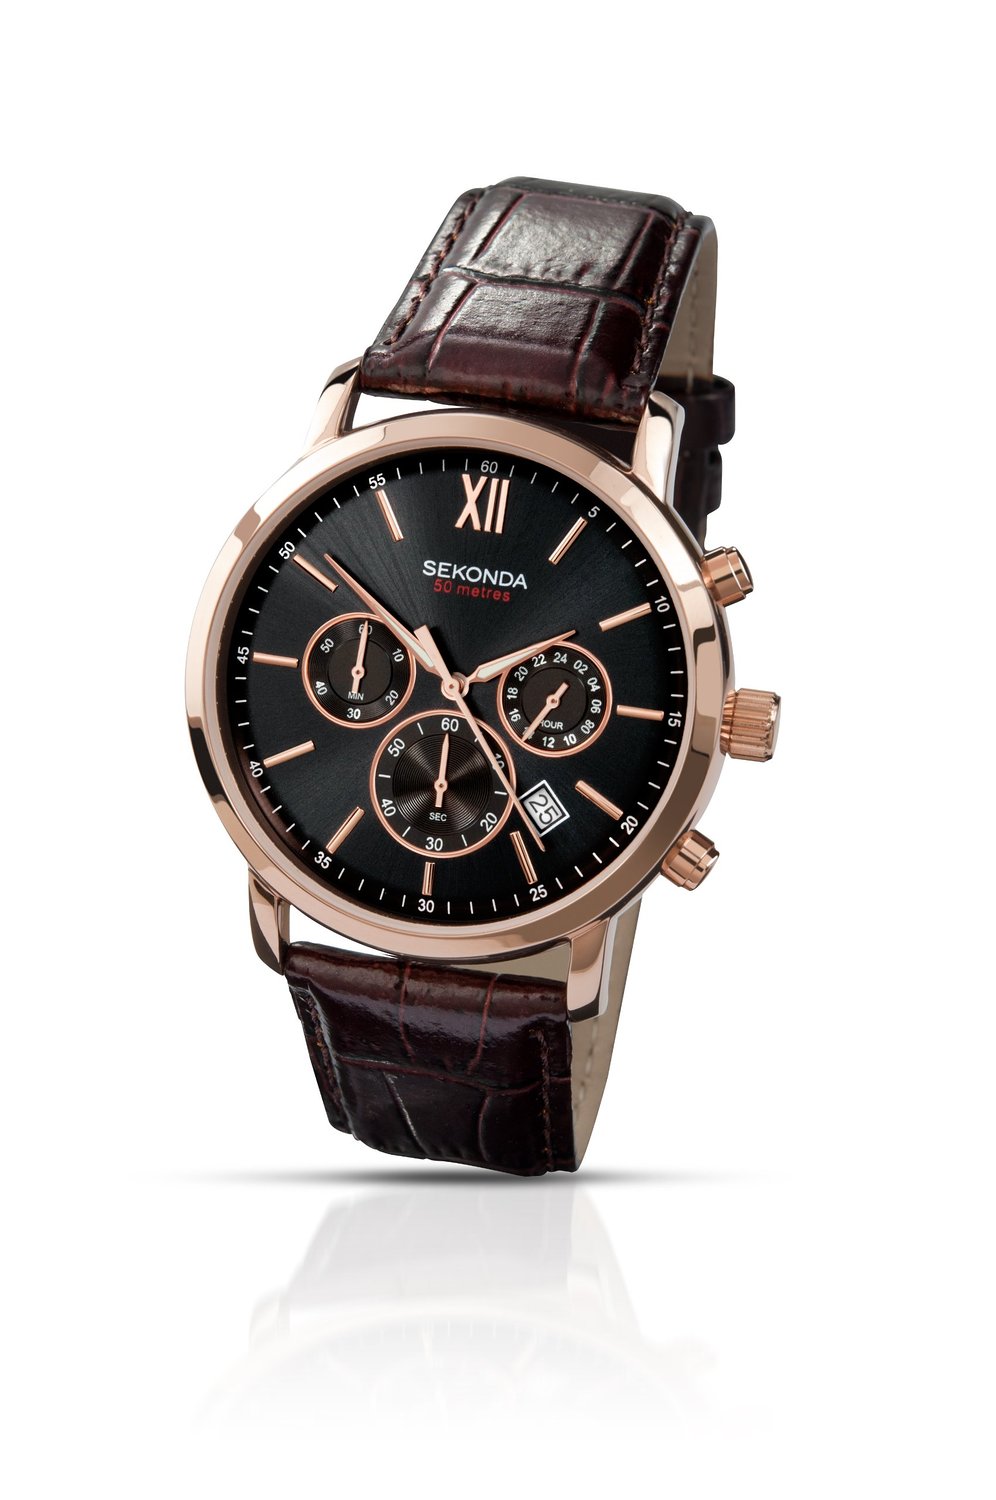 Sekonda Men's Quartz Watch with Black Dial Analogue Display and Brown Leather Strap 3406.27